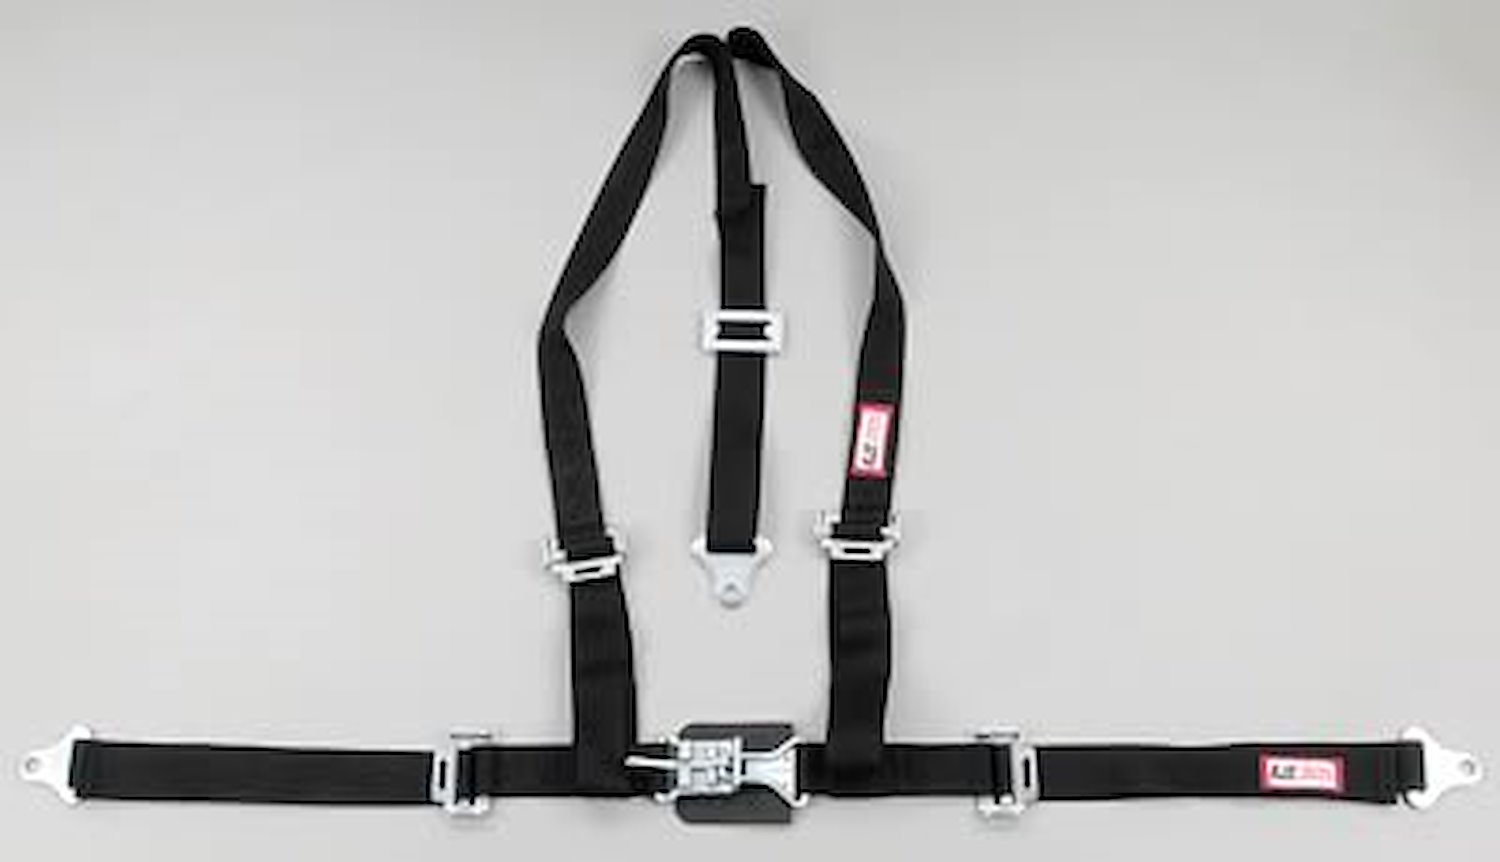 NON-SFI L&L HARNESS 3 PULL DOWN Lap BELT SEWN IN 2 S.H. Y FLOOR Mount ALL WRAP ENDS YELLOW